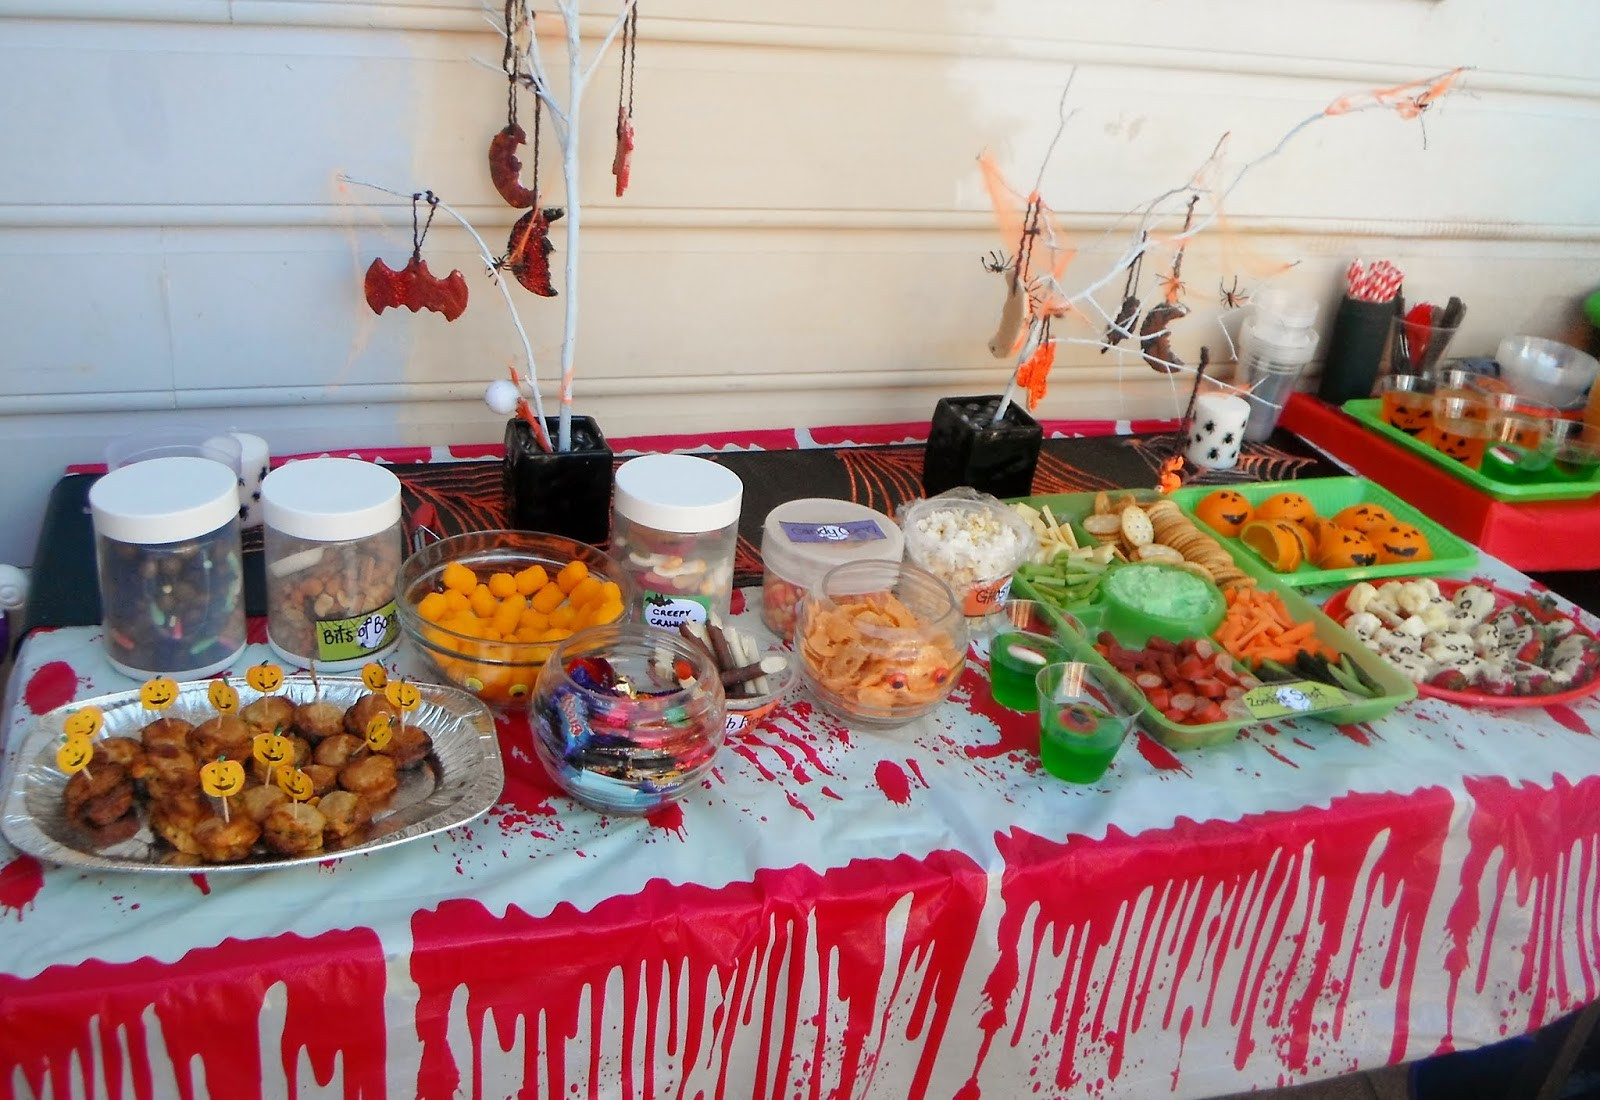 Adult Halloween Party Food Ideas
 Adventures at home with Mum Halloween Party Food